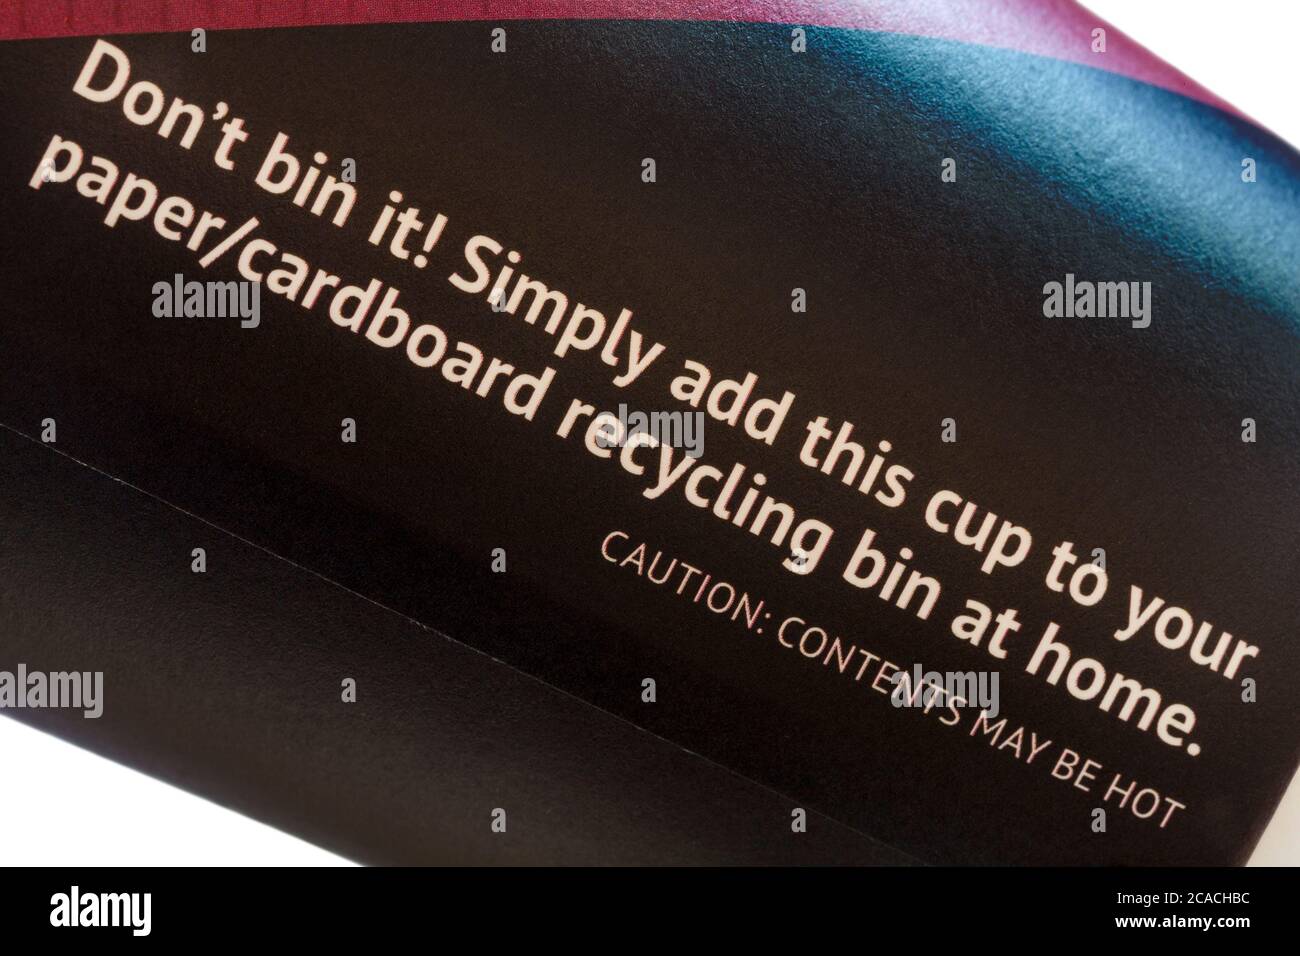 Don't bin it. Simply add this cup to your paper/cardboard recycling bin at home - detail on Go eco friendly cup Stock Photo